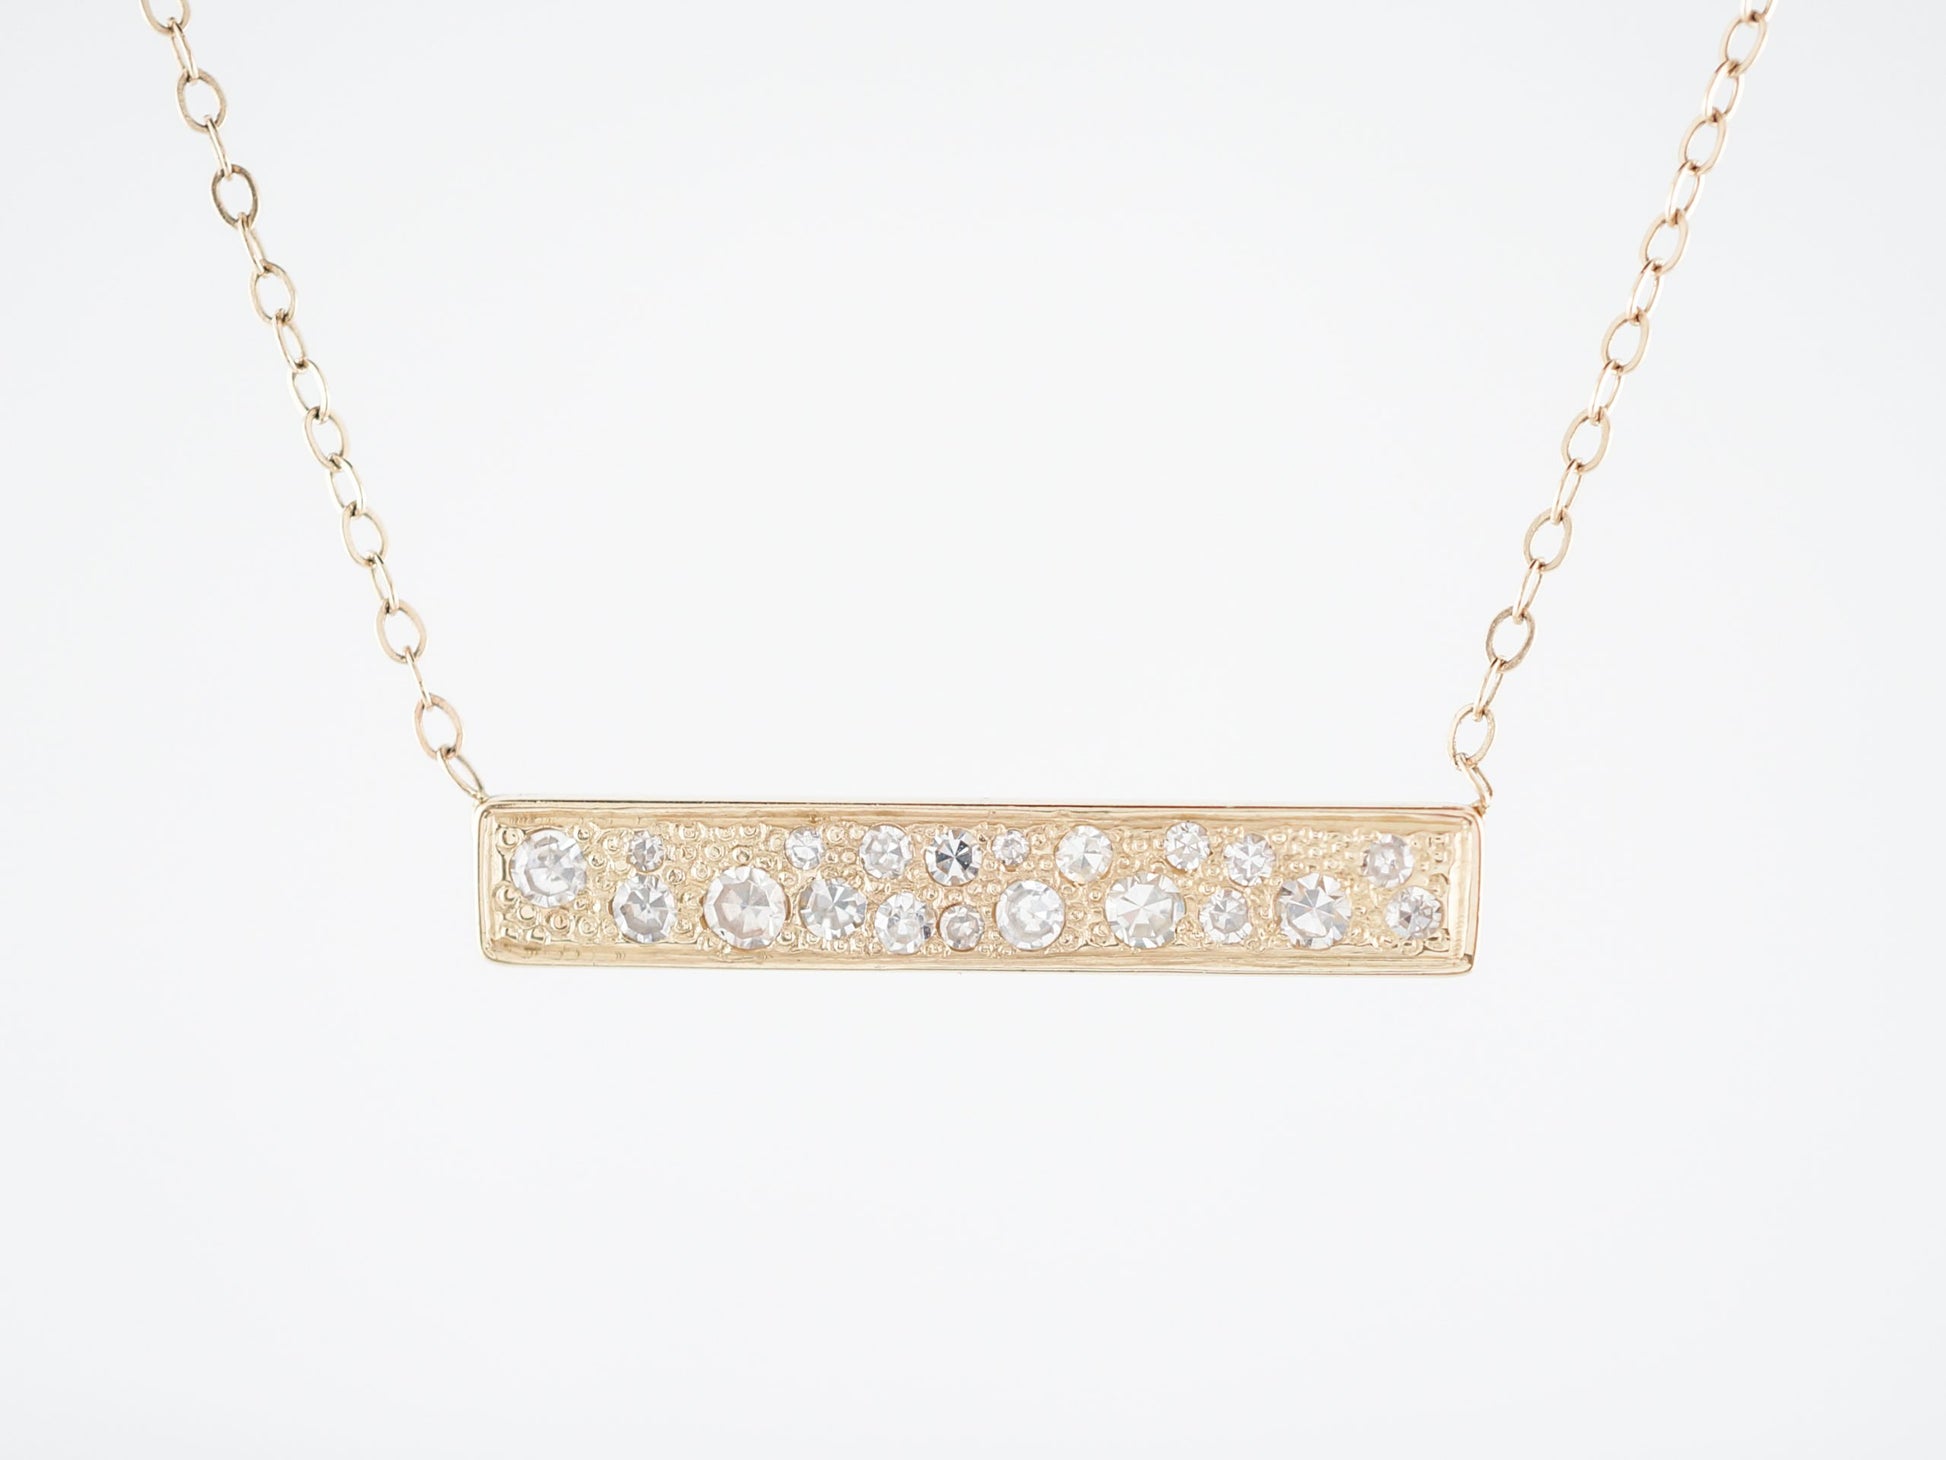 Modern Bar Necklace .80 Single Cut Diamonds in 14k Yellow GoldComposition: Platinum Total Diamond Weight: .80ct Total Gram Weight: 2.70 g